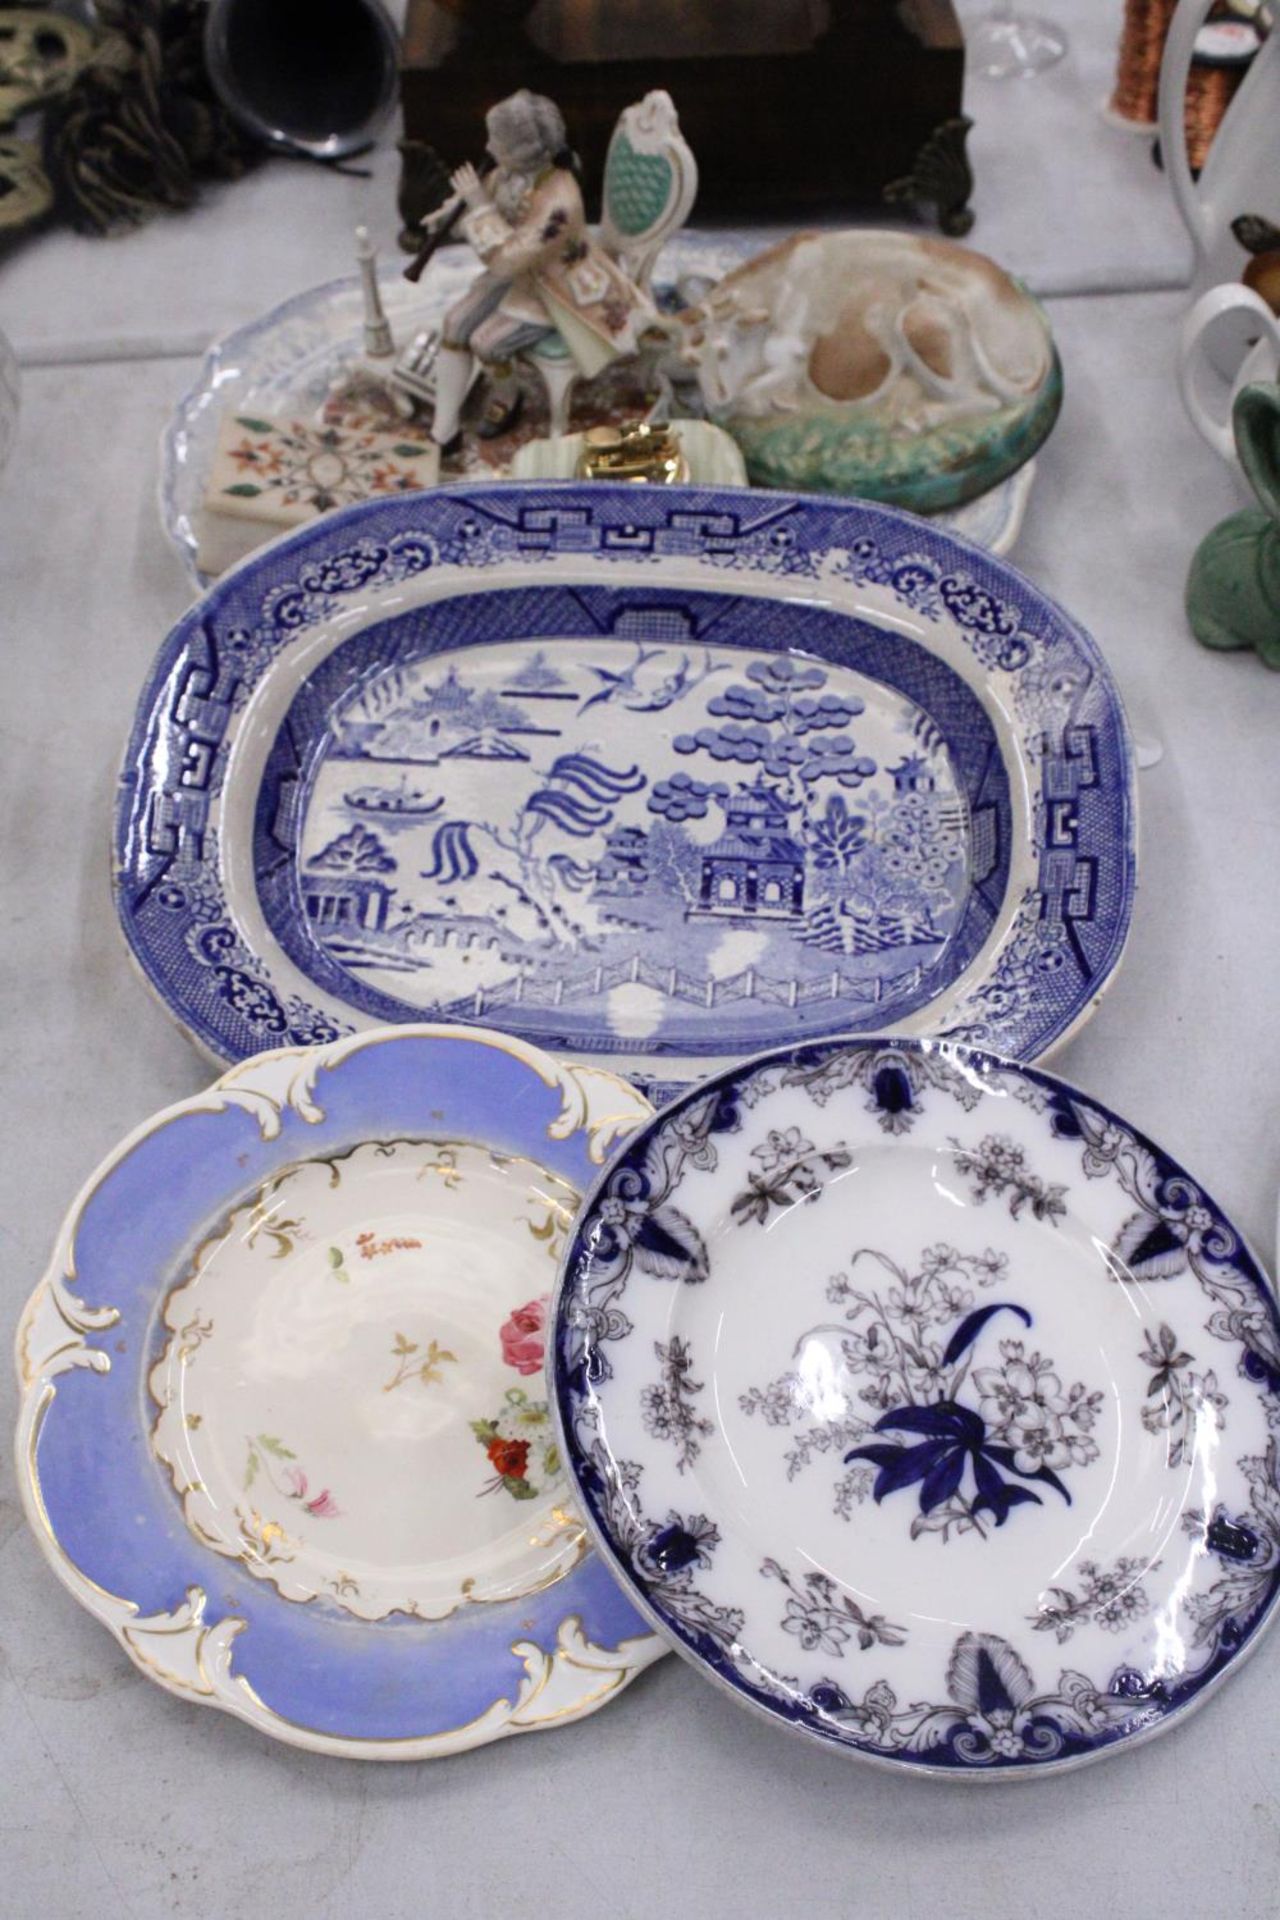 TWO VINTAGE BLUE AND WHITE PLATTERS, CABINET PLATES, AN ONYX TABLE LIGHTER, TRINKET BOX AND FIGURINE